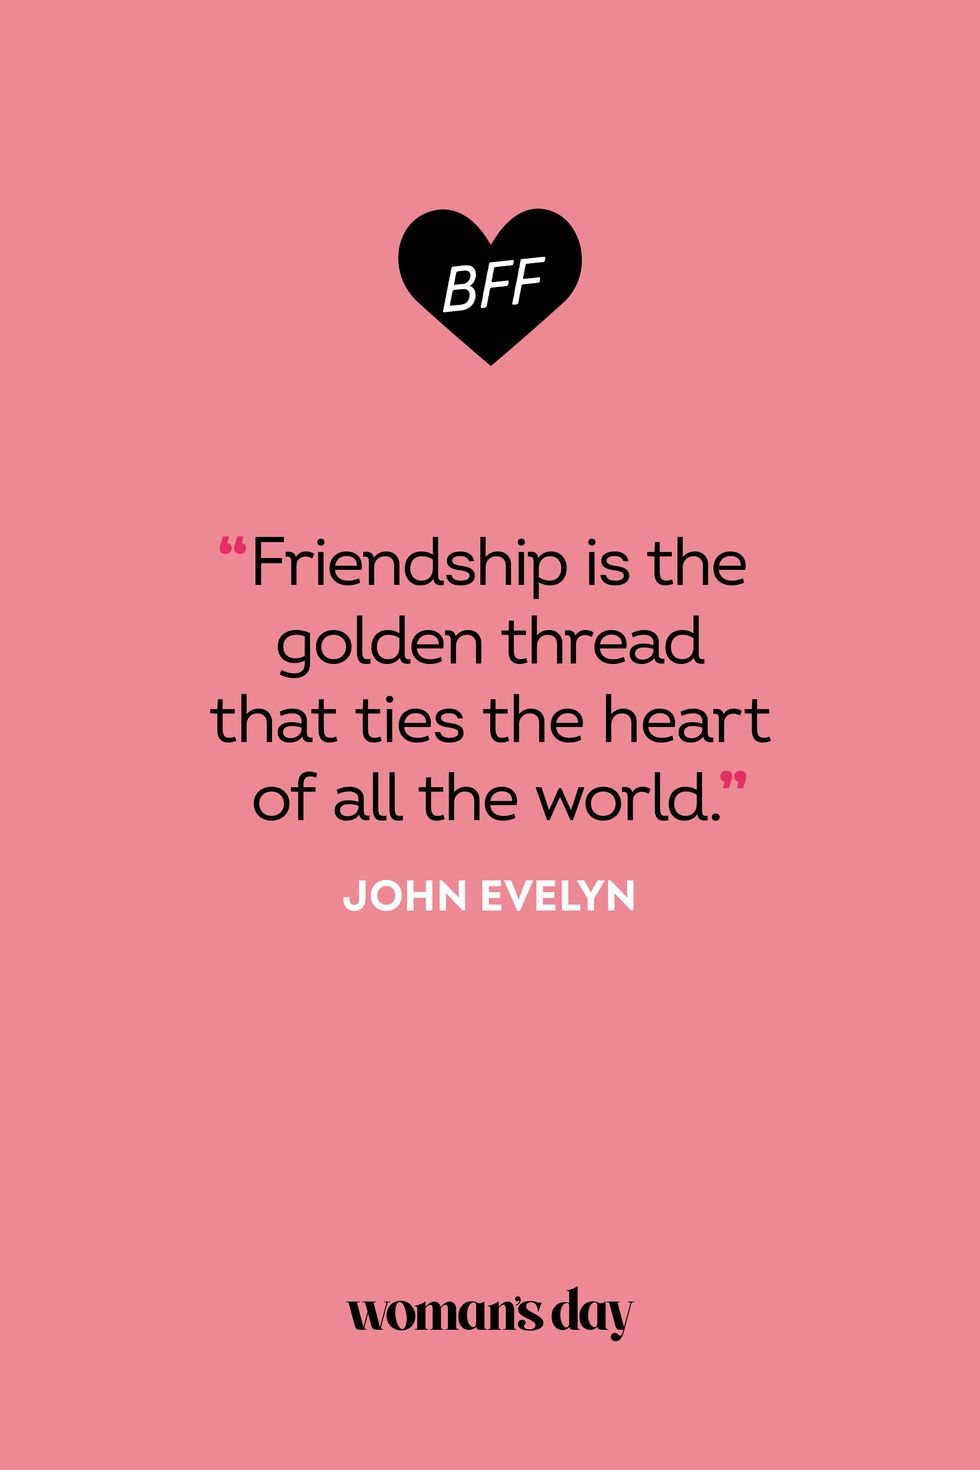 friendship quotes, Best friend quotes, Friendship Day Quotes, Caption  for friends, Friendship messages, Best friend captions, Best friends  forever quotes